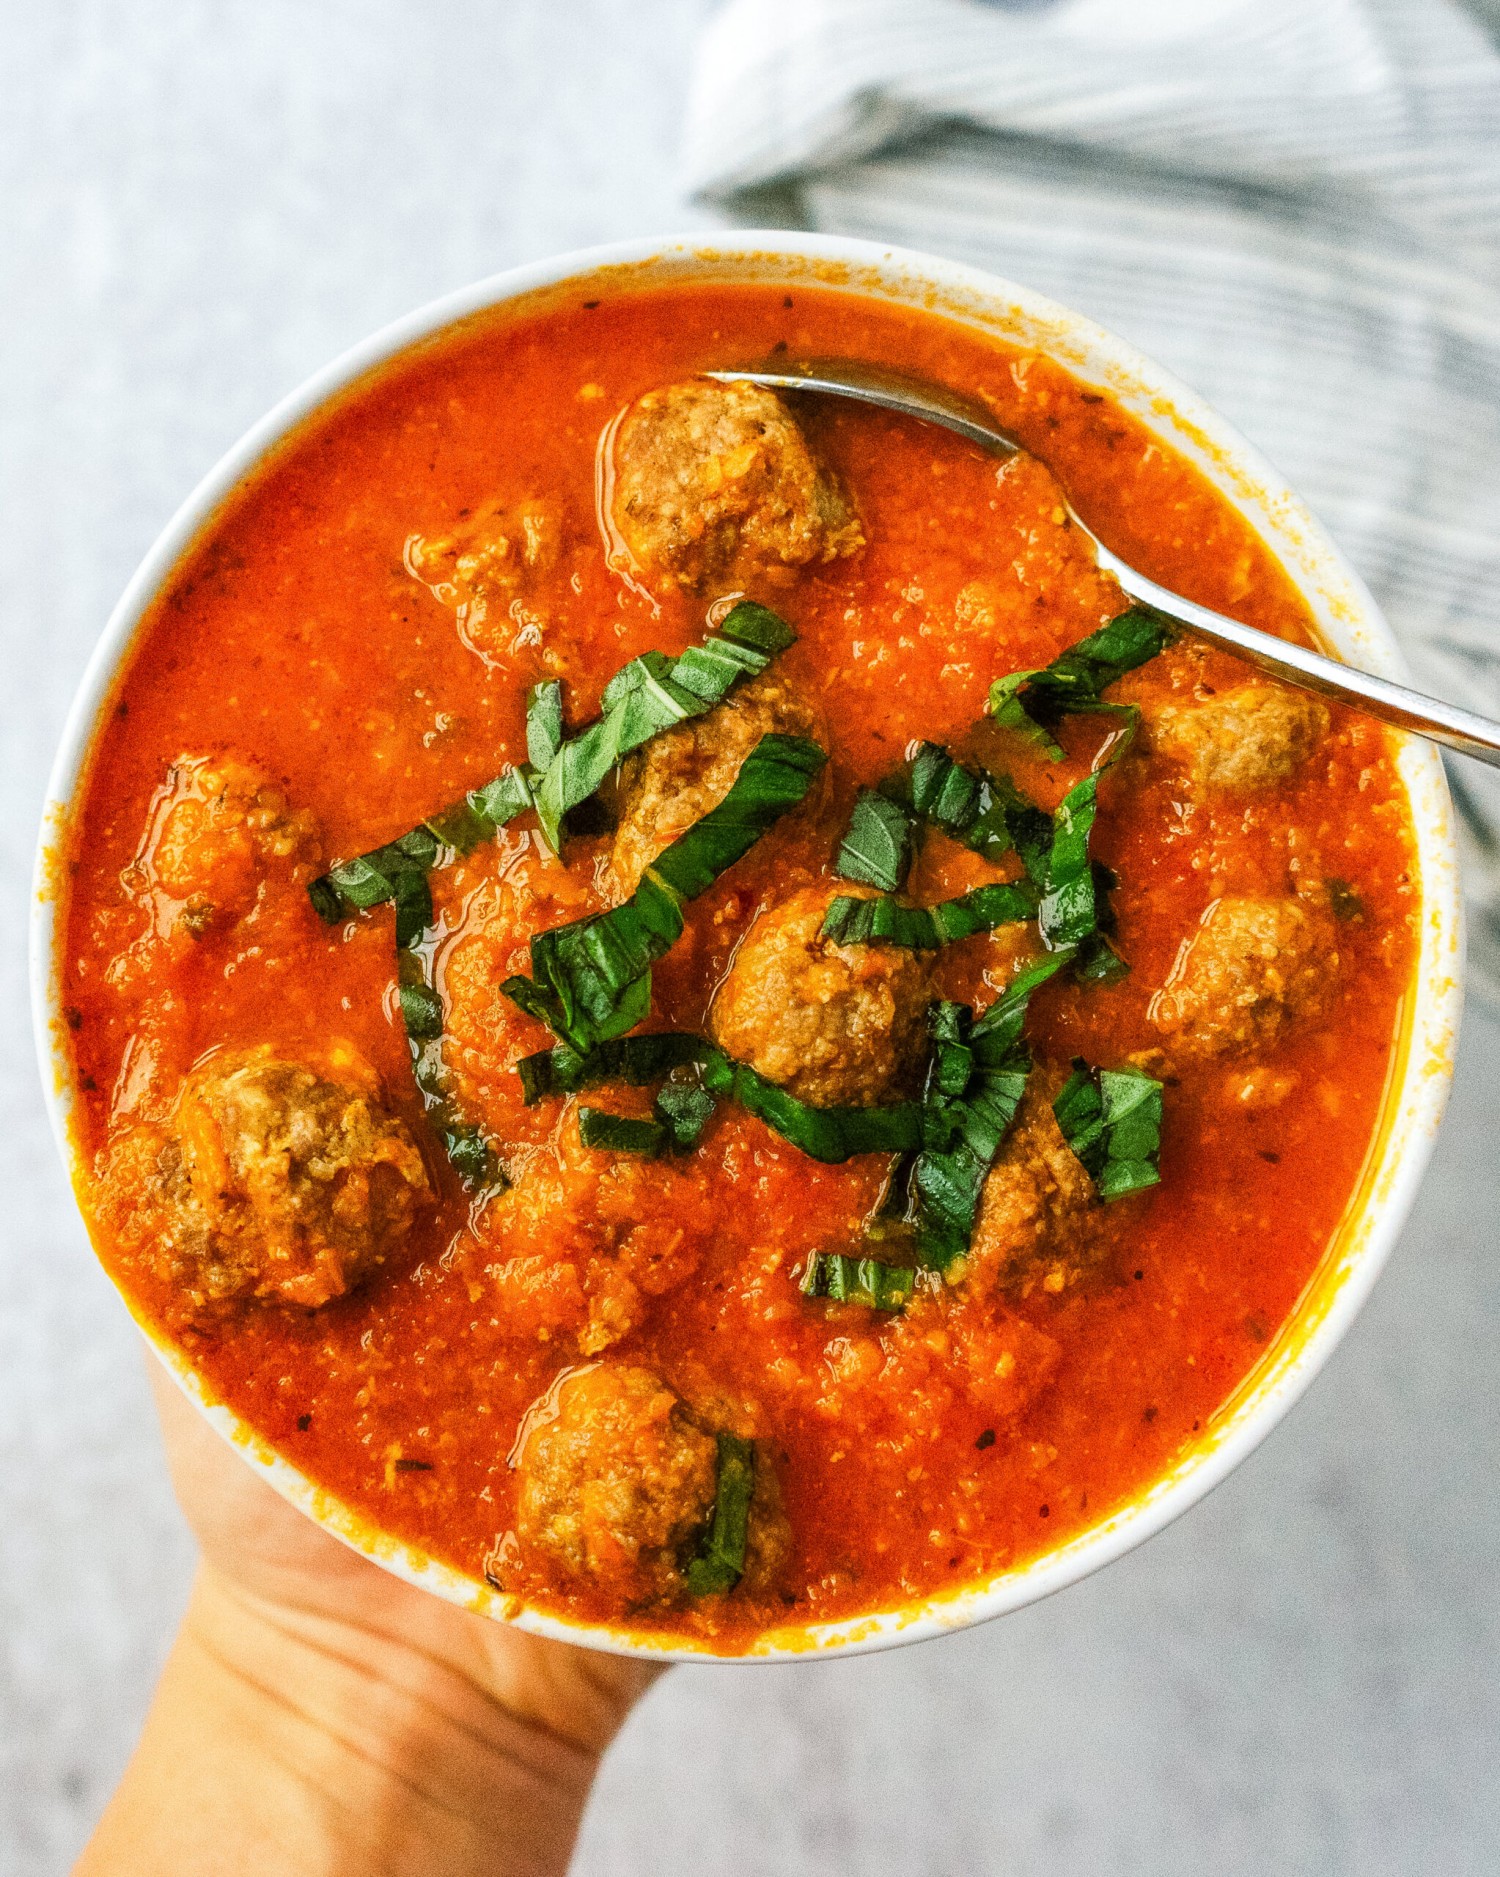 Above view of a bowl of tomato basil meatball soup made with mini beef meatballs